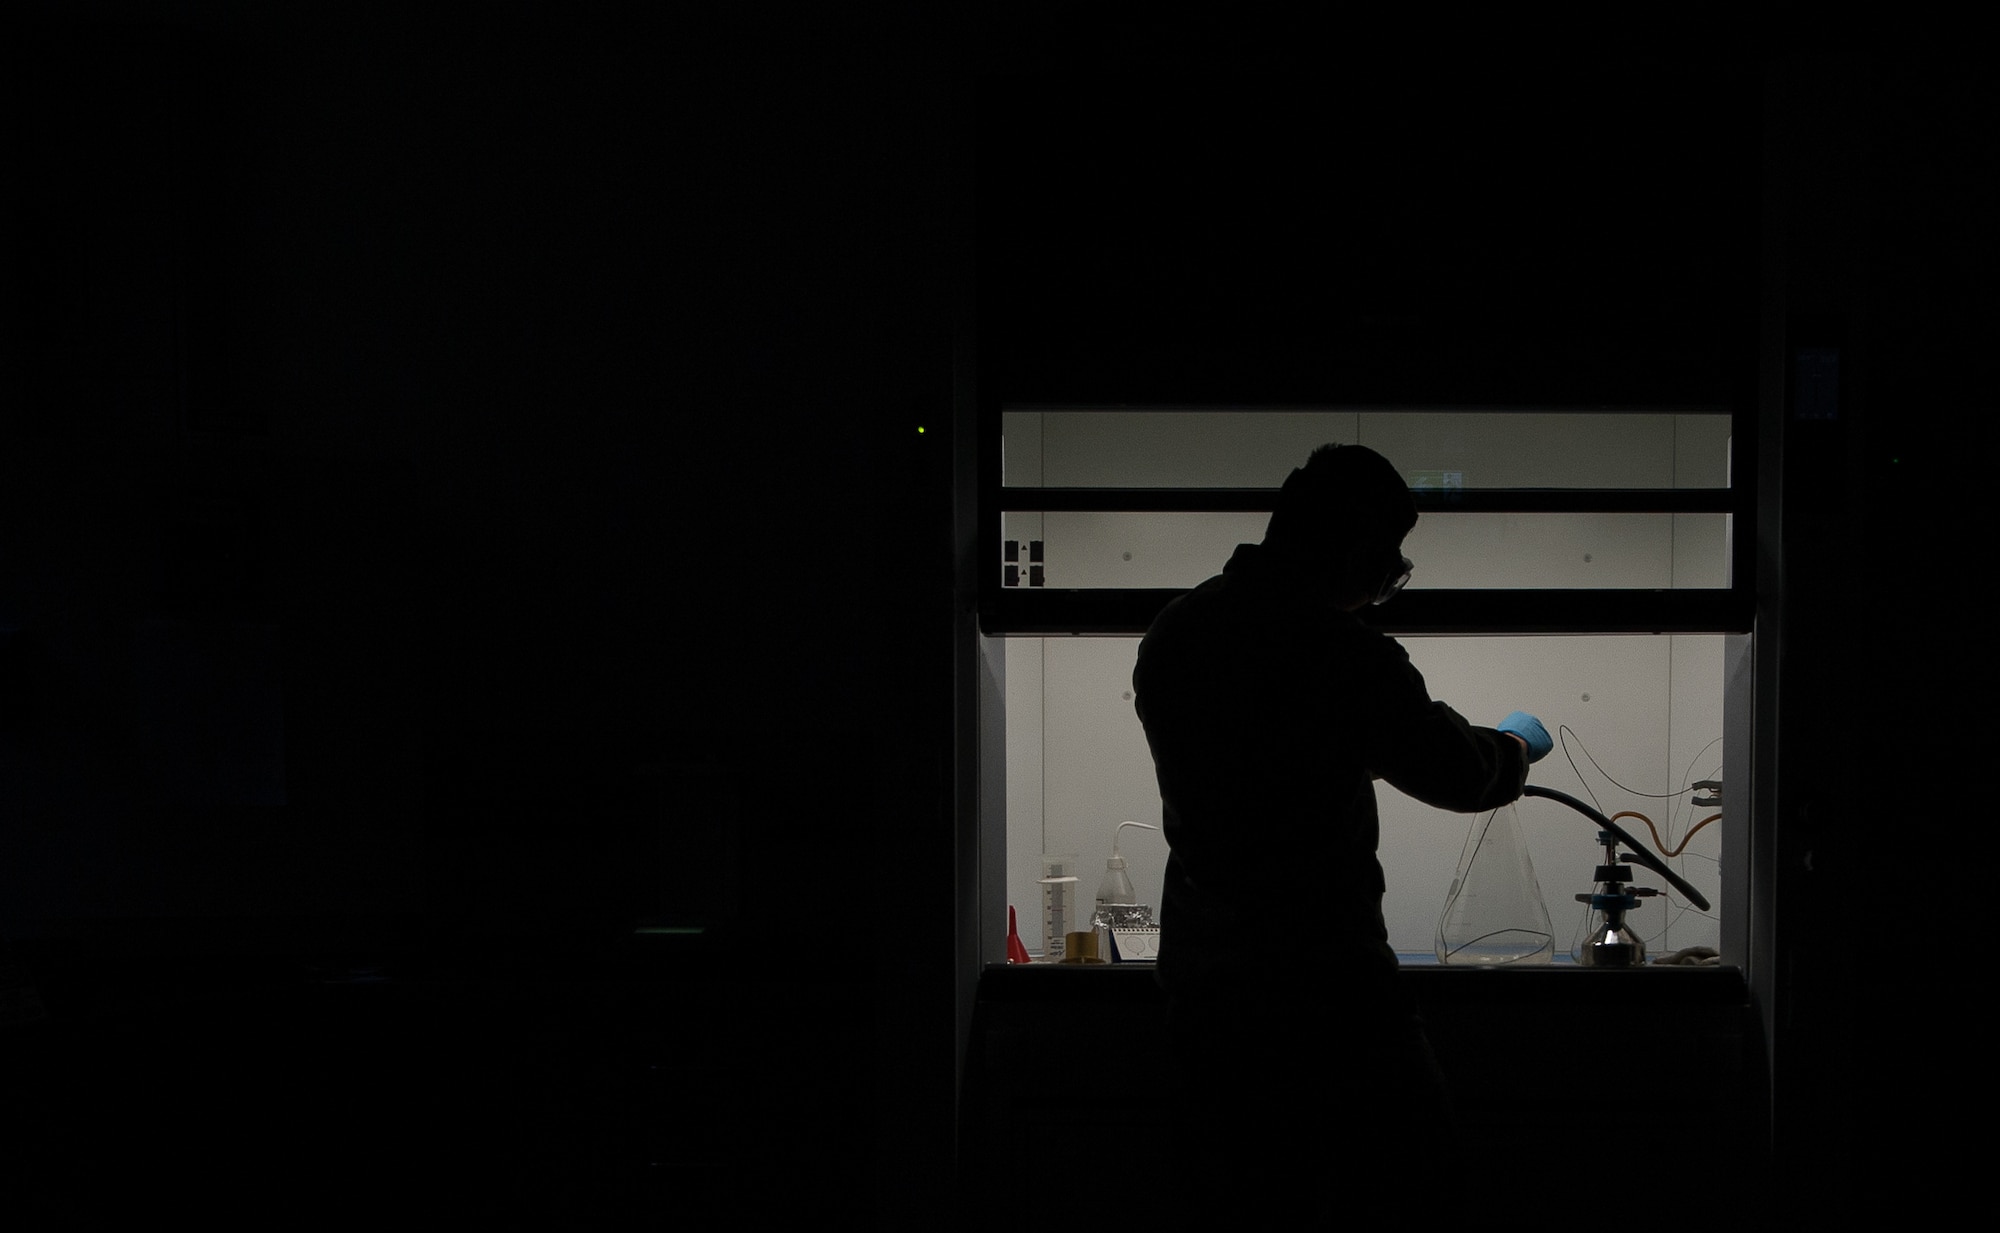 Airman 1st Class Phillip Nguyen, 86th Logistics Readiness Squadron fuels laboratory technician, samples and analyzes fuel at Ramstein Air Base, Germany, Dec. 12, 2016. It is the job of fuels specialists to manage every aspect of the refueling for every aircraft on the flightline, from the time they obtain the fuel to the moment it’s pumped in the planes. (U.S. Air Force photo by Airman 1st Class Lane T. Plummer)